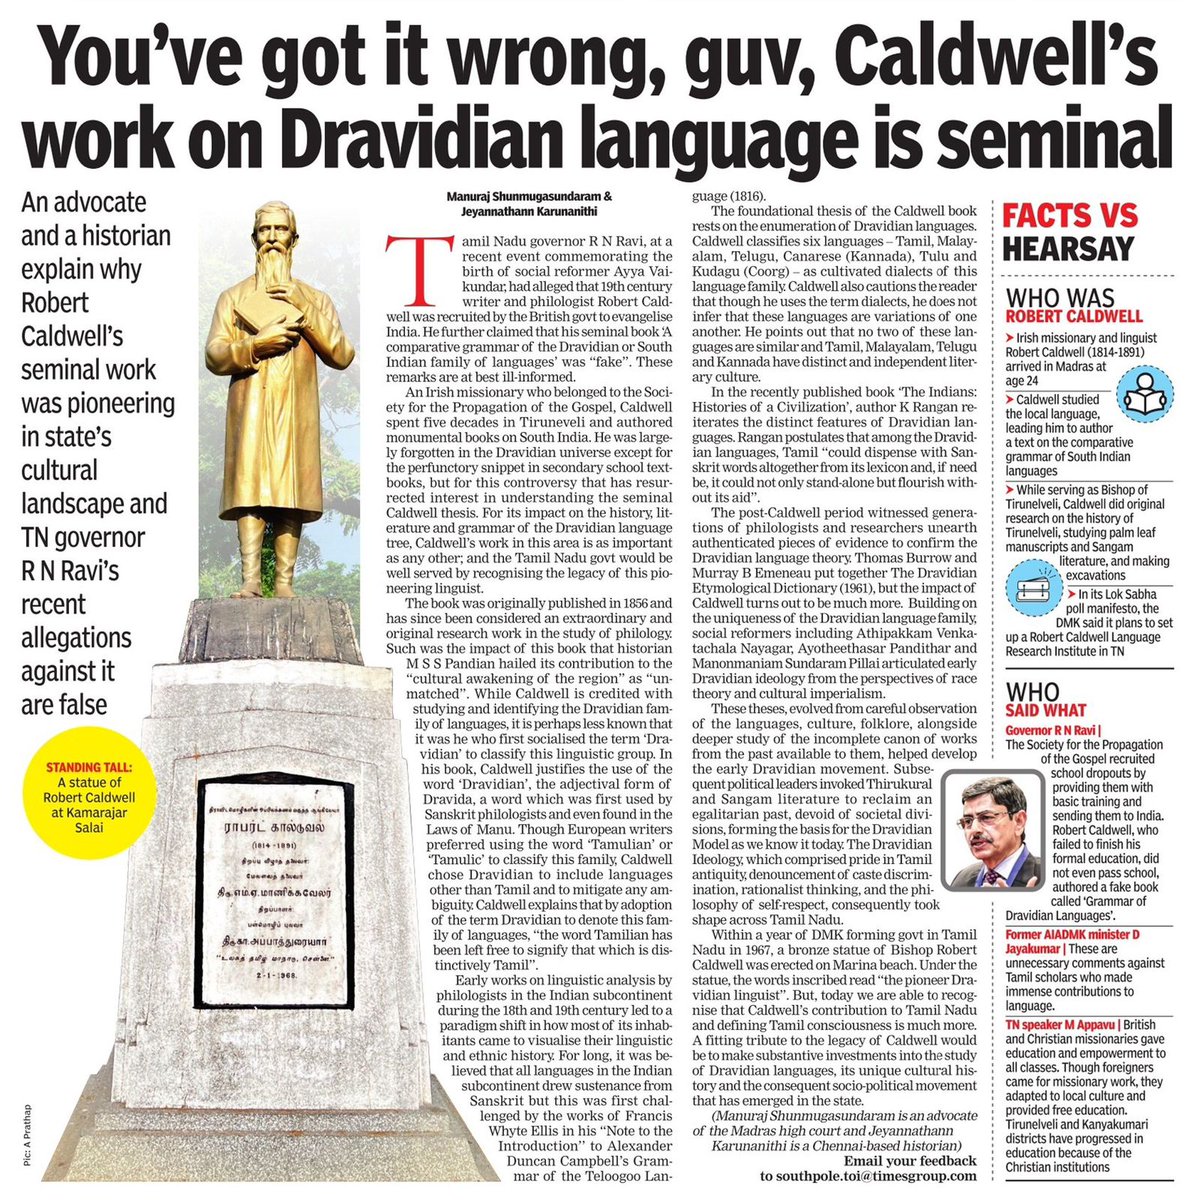 For today’s Times of India (Chennai edition) Jeyan and I have written about a forgotten figure in the Dravidian Universe - Robert Caldwell, who is accredited with using (and choosing) the word Dravidian for the first time and popularising it through his study of languages.